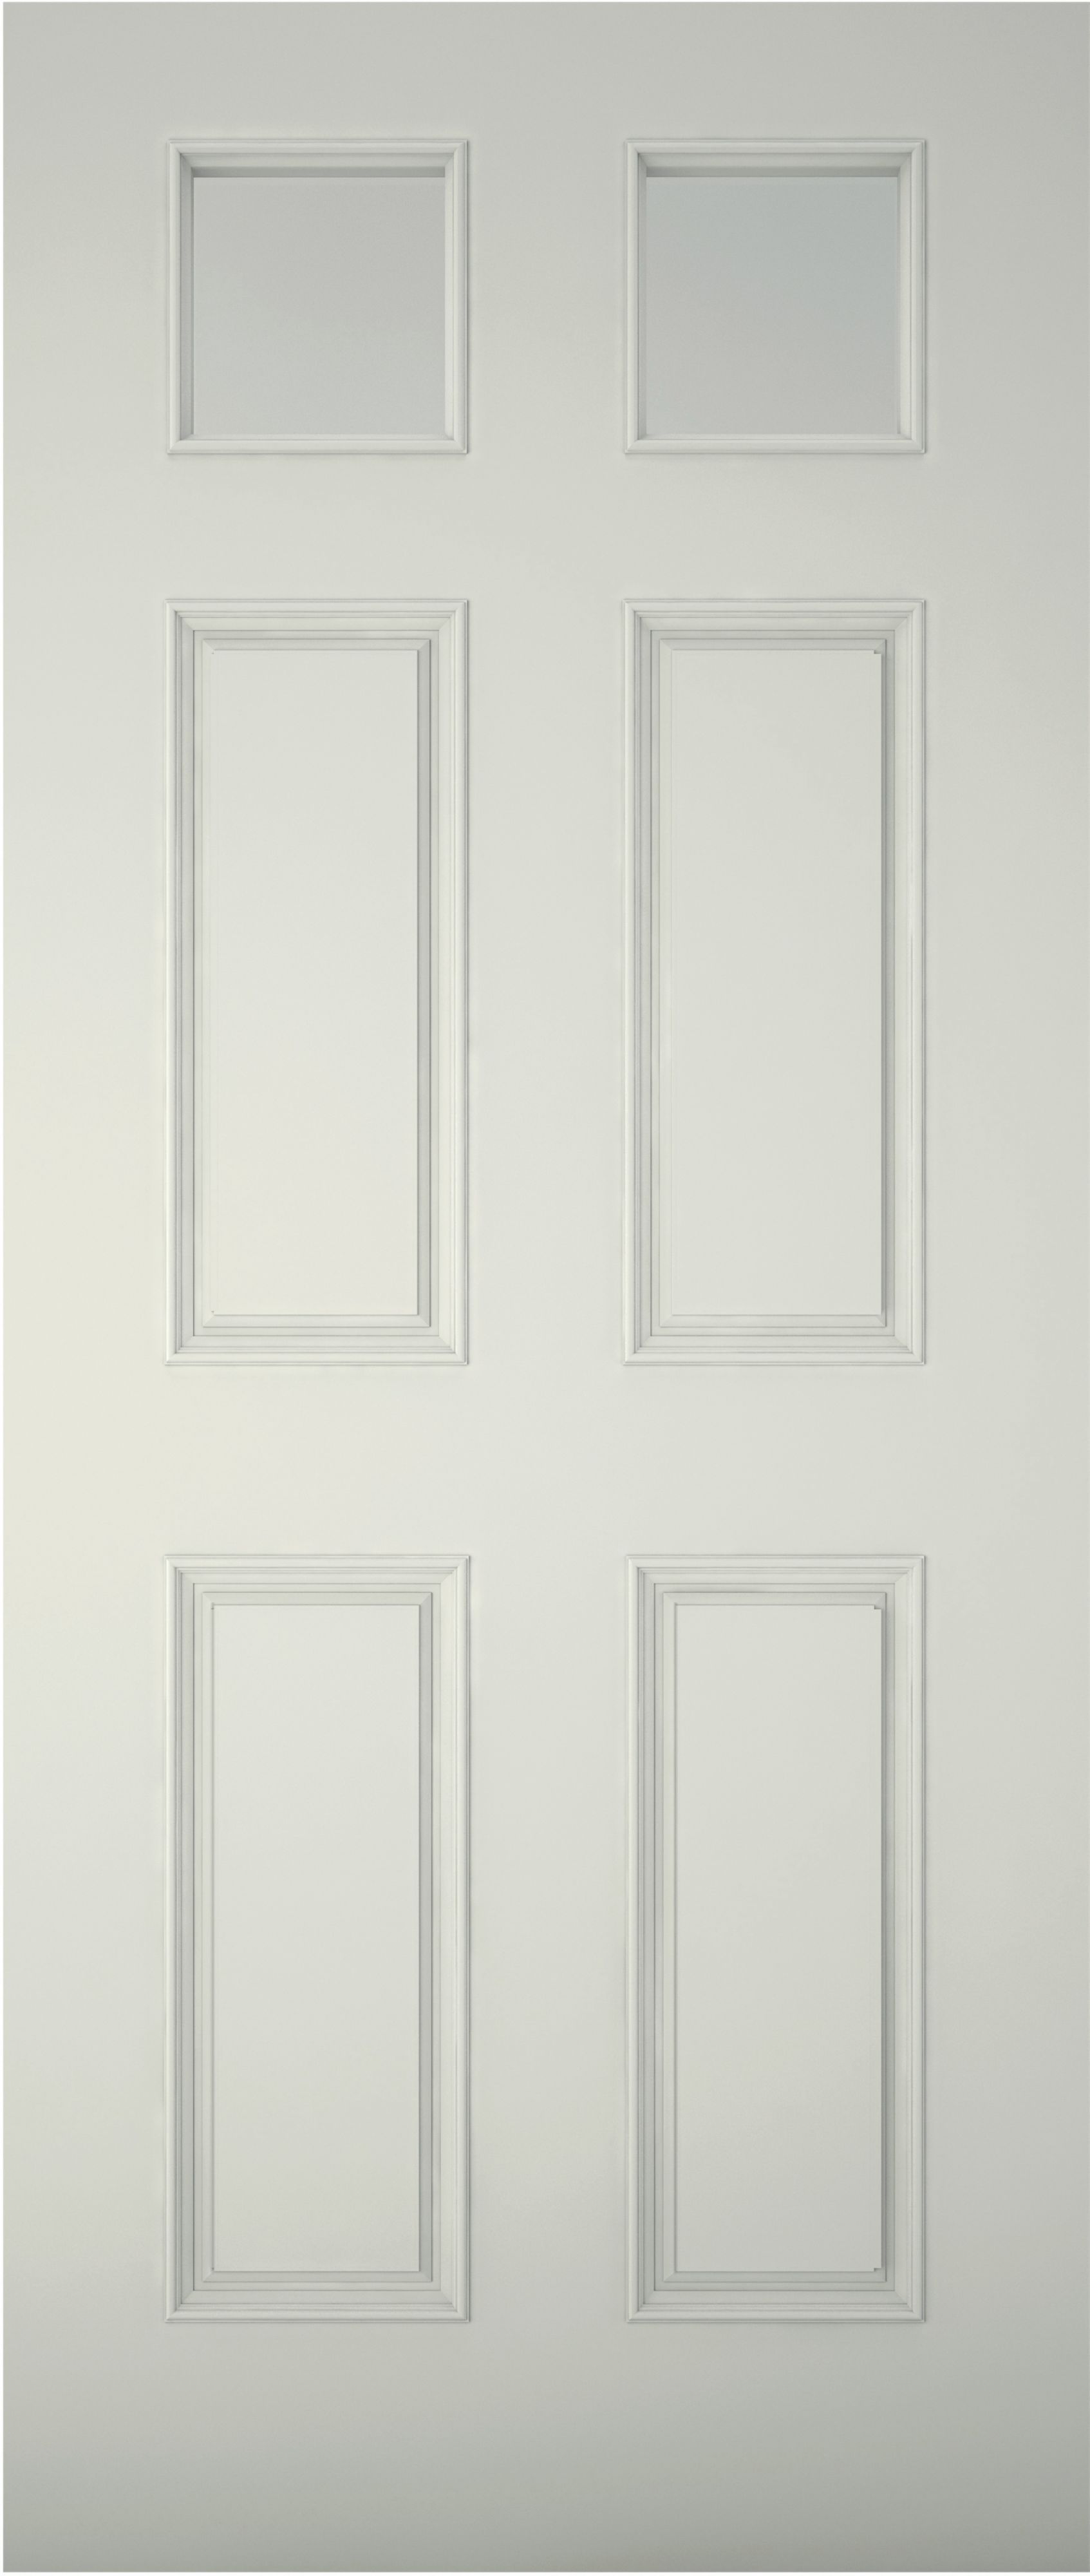 6 panel Frosted Glazed White LH & RH External Front Door set, (H)2074mm (W)932mm